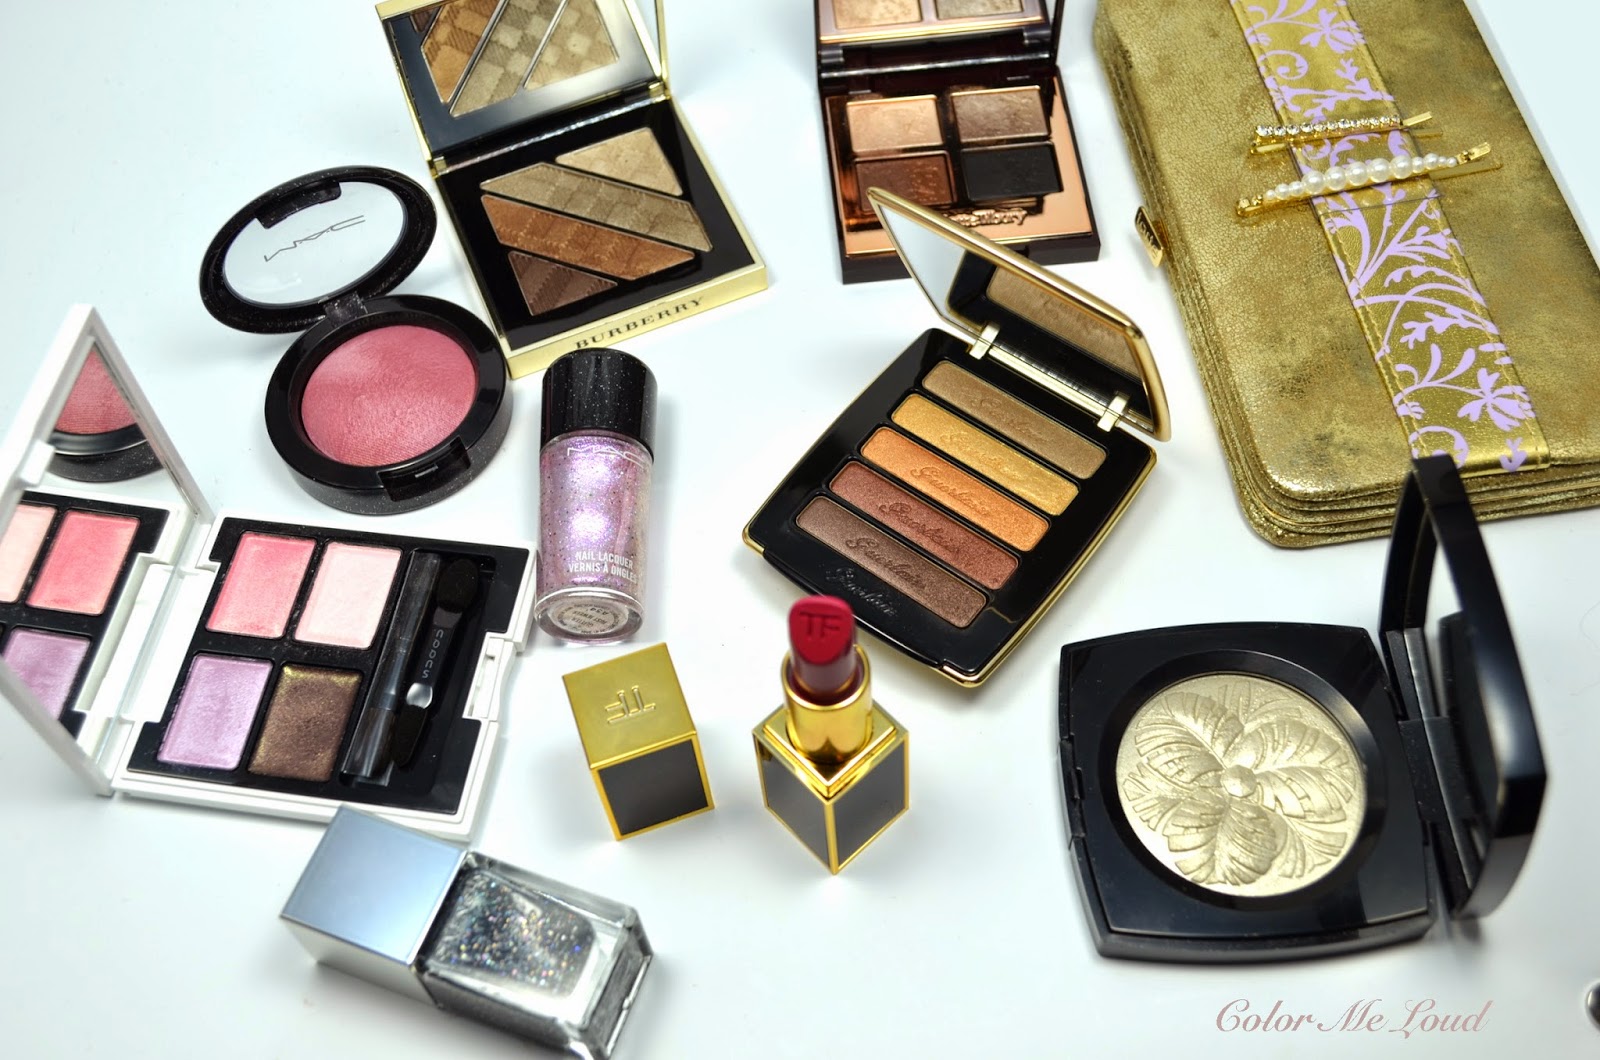 Top Ten: Holiday 2014 Edition, My Picks and Don't Misses from Holiday Make-up Collections 